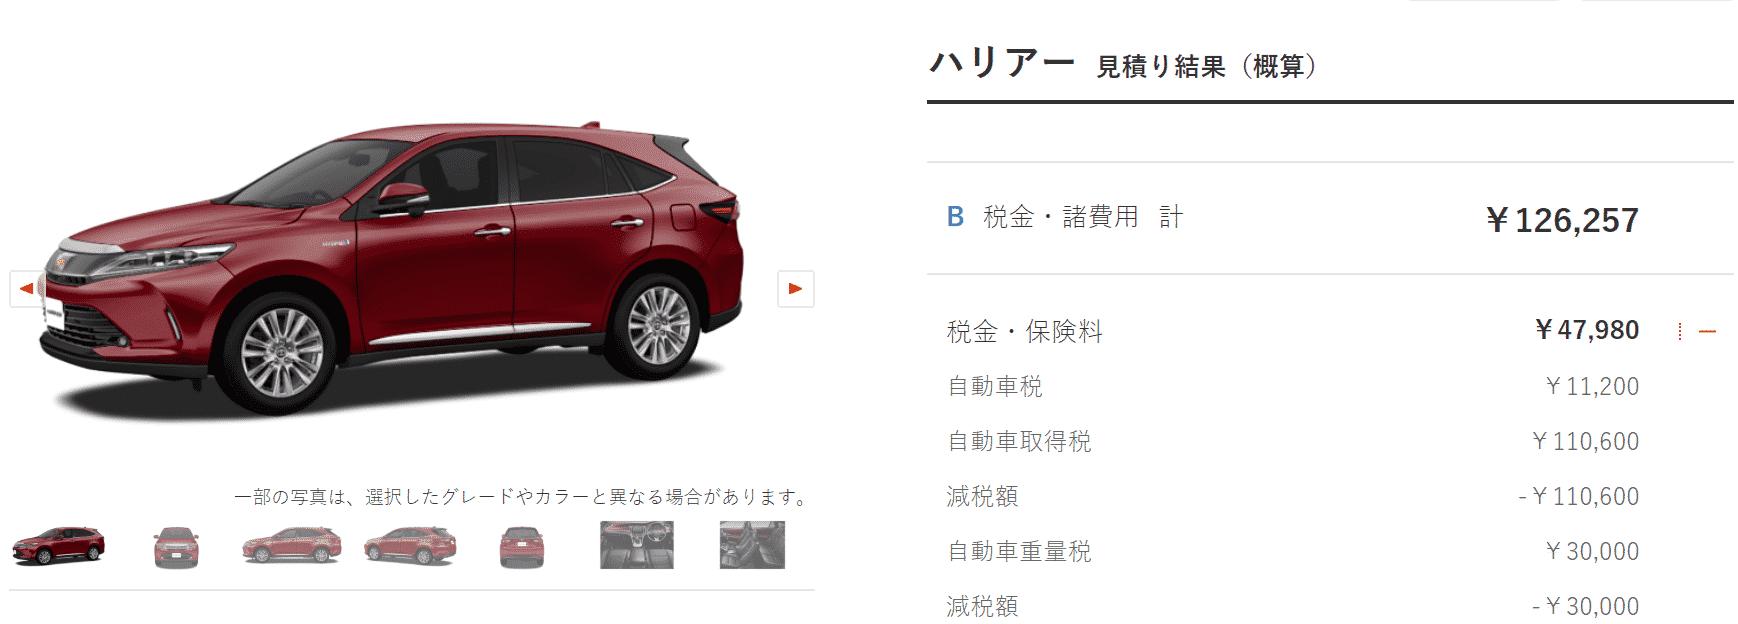 「PREMIUM “Metal and Leather Package”」ハイブリッド車の税額画像